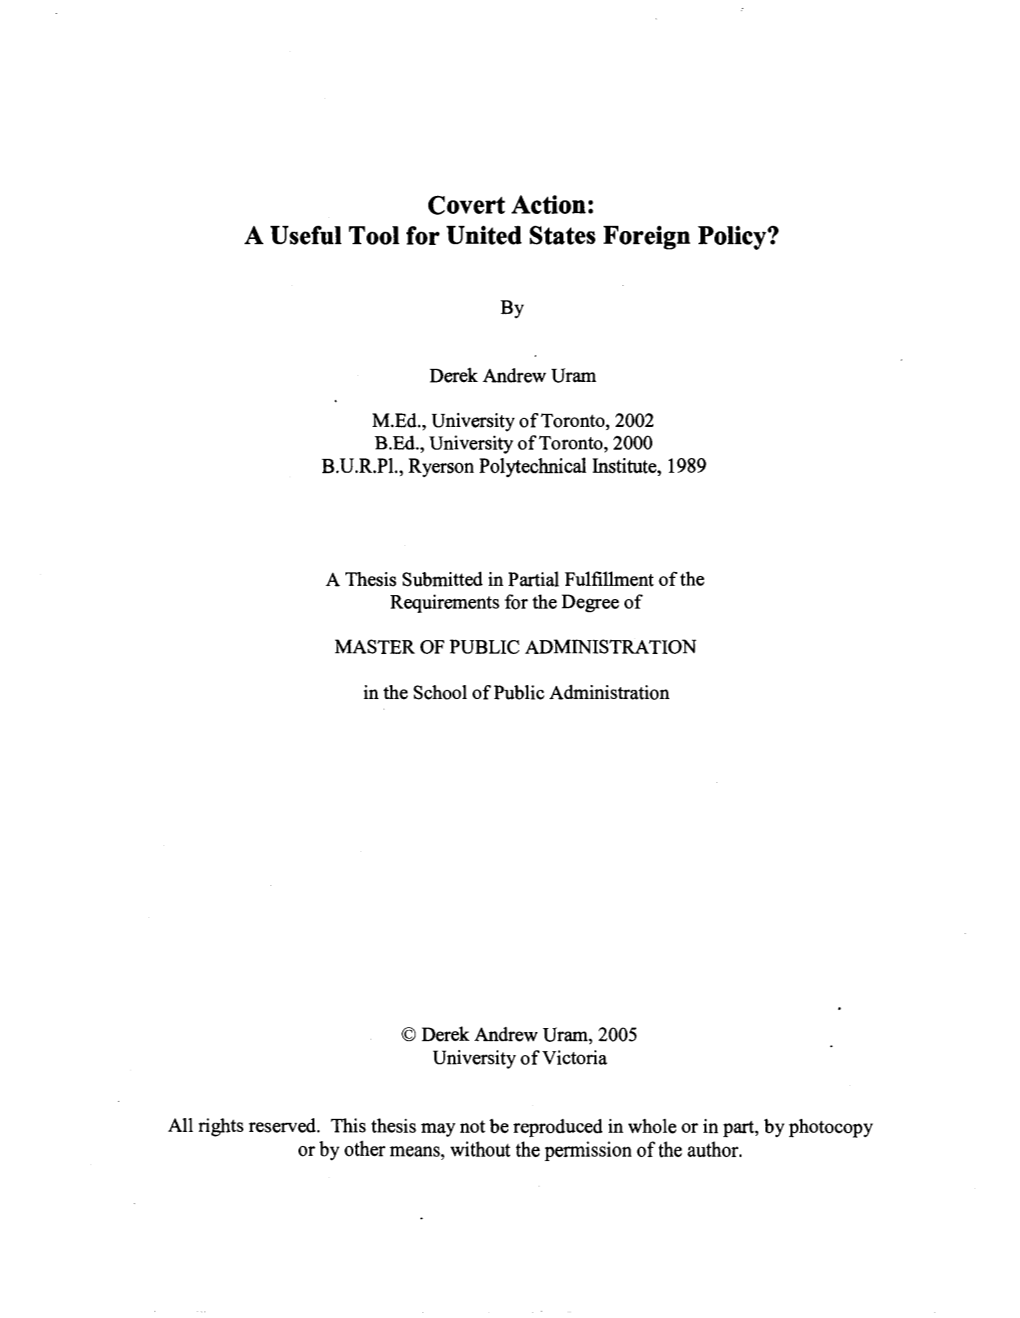 Covert Action: a Useful Tool for United States Foreign Policy?